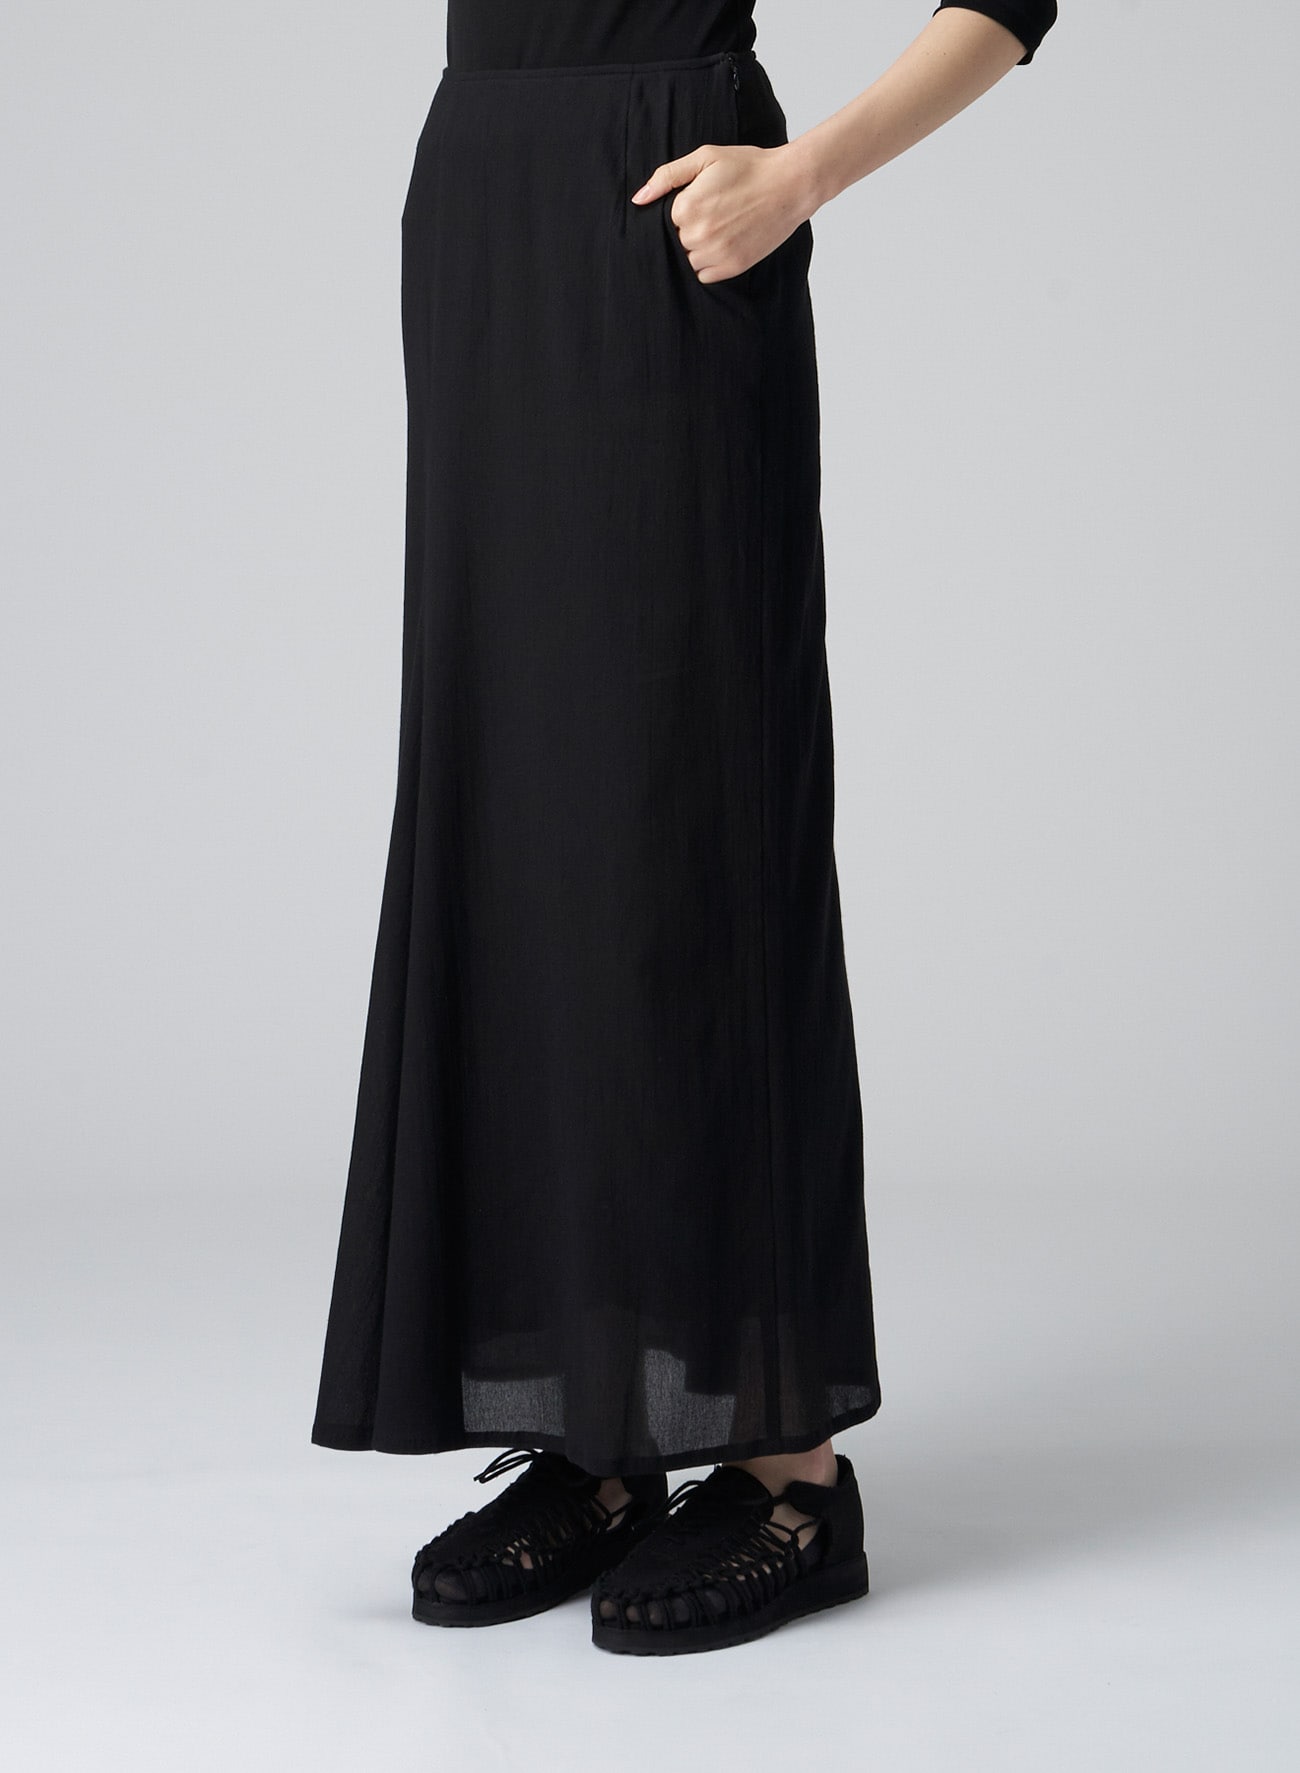 C/CHIFFON DOUBLE LAYERED RIGHT SIDE FLARE S(S Black): Vintage｜THE 